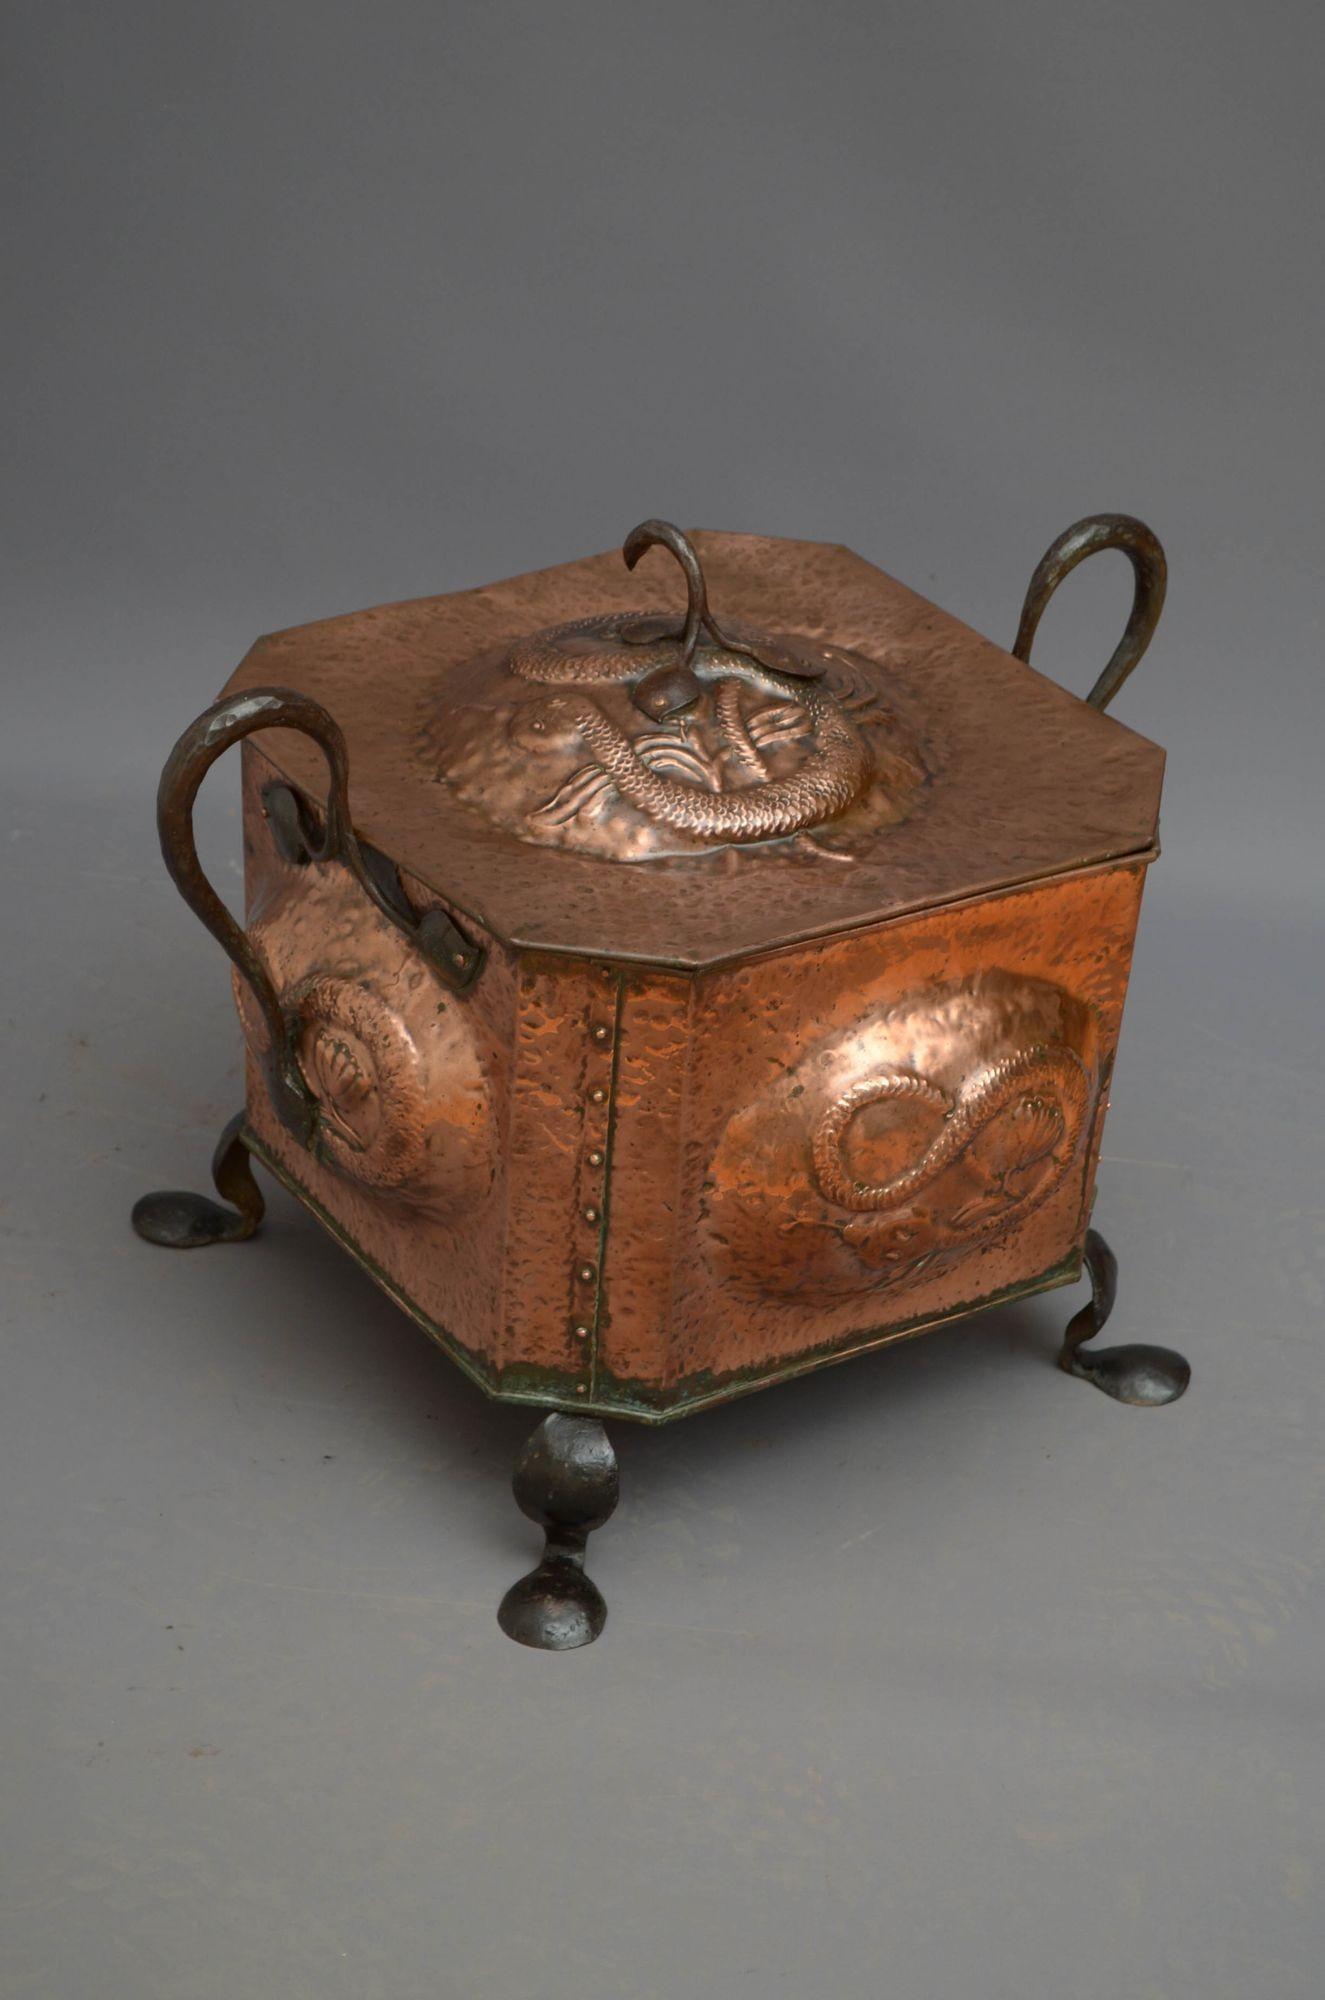 Sn5448 Arts and Crafts coal bucket, having lift up lid depicting a snake fitted with wrought iron handle, four sides with infinity motif also depicted by a snake and two wrought iron handles, all standing on pad feet. This antique coal bin is in